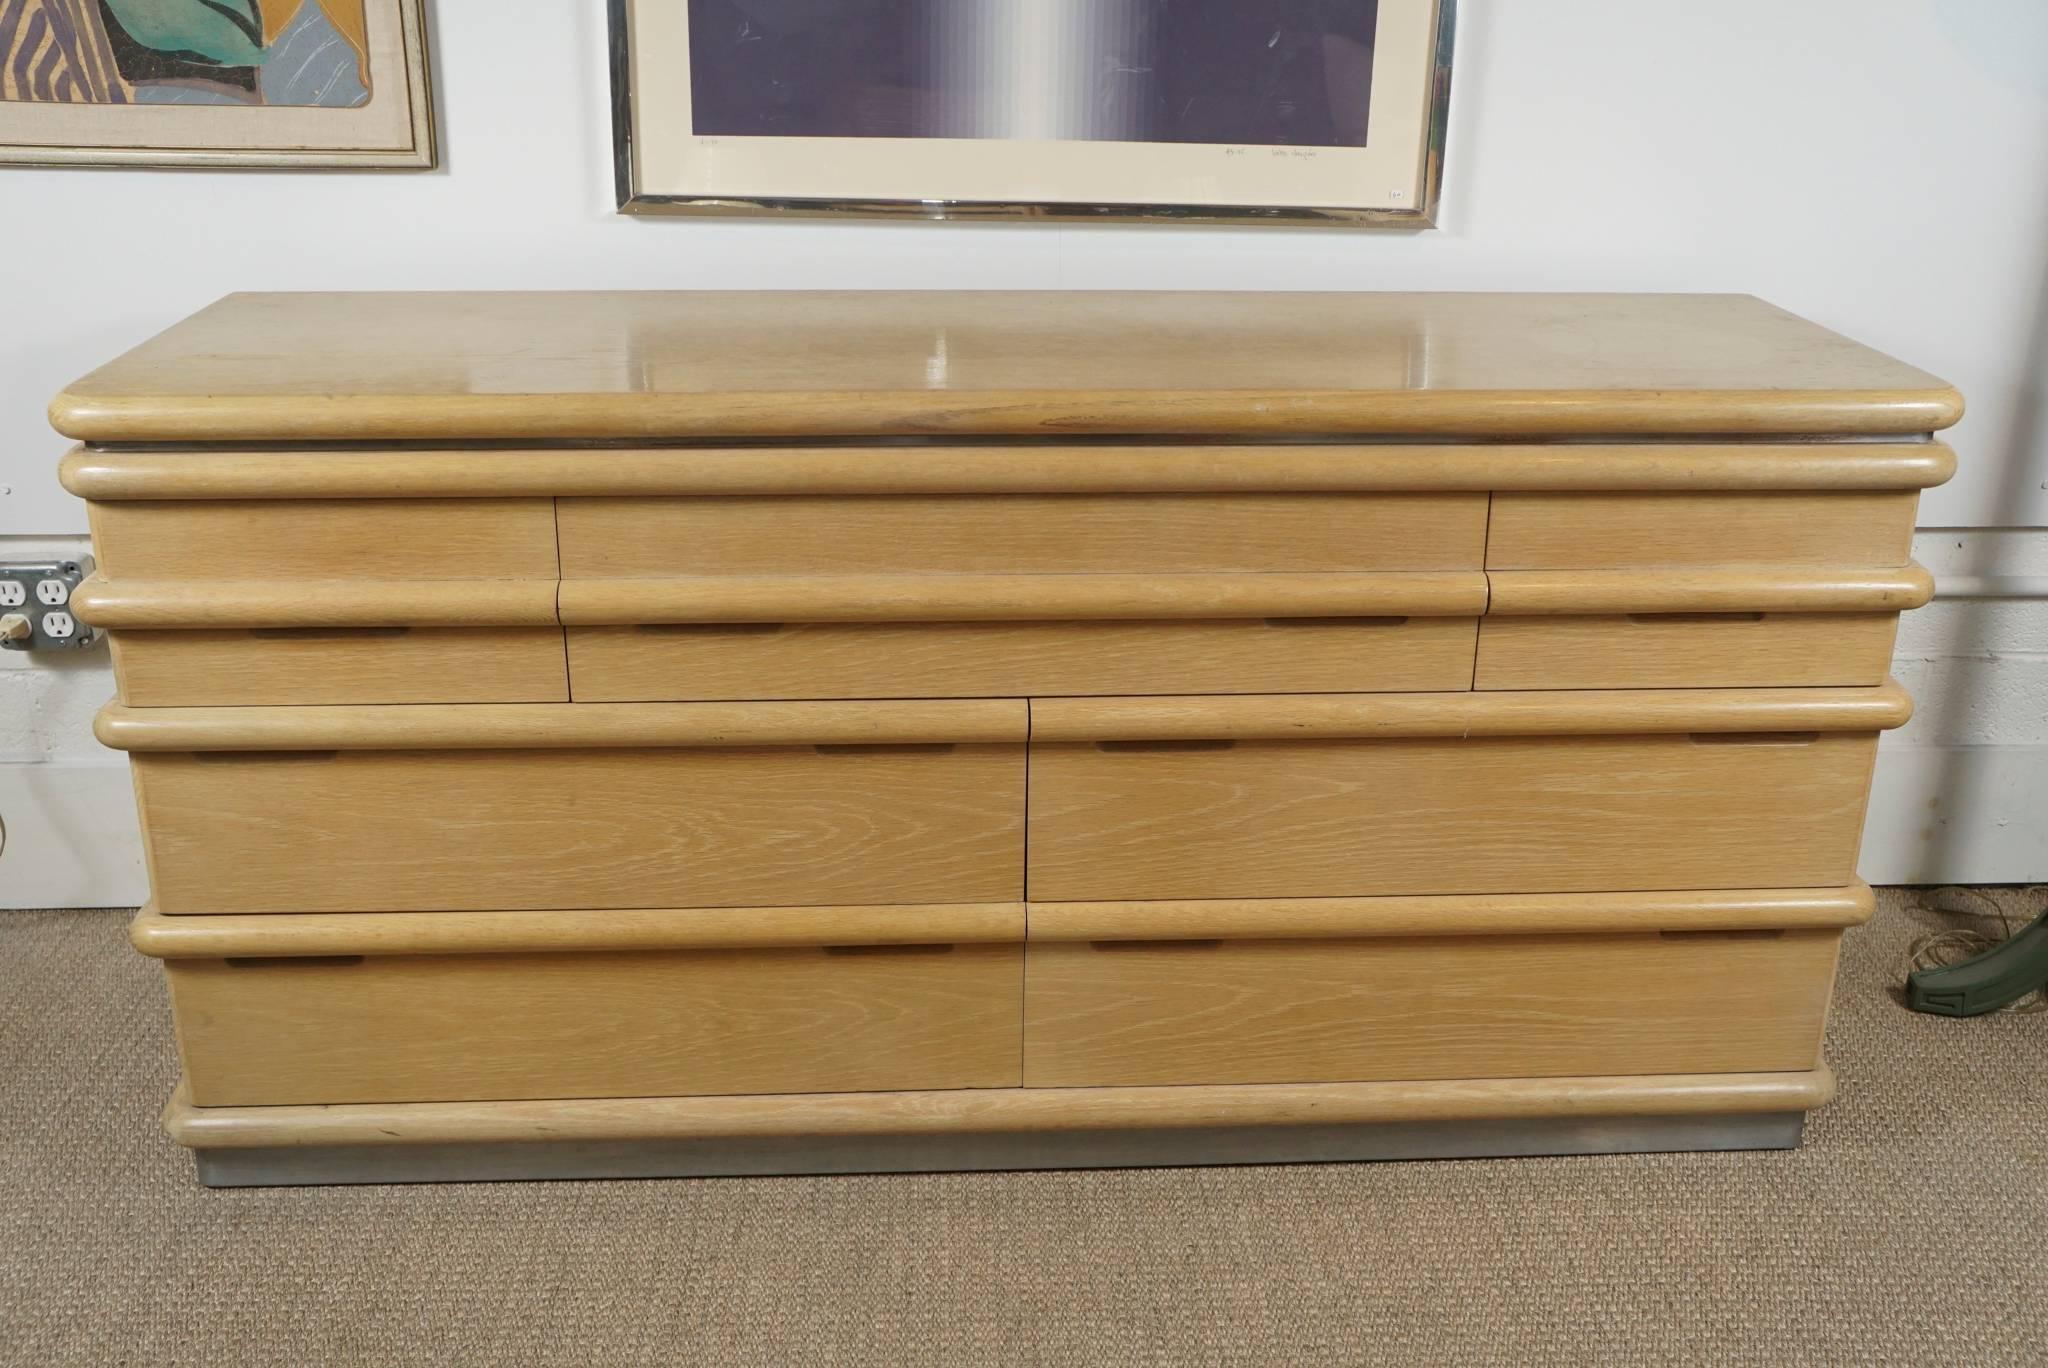 Here is a great dresser in a blonde oak by Jay Spectre for Century.
The piece features various drawer sizes and has a brushed aluminium base.